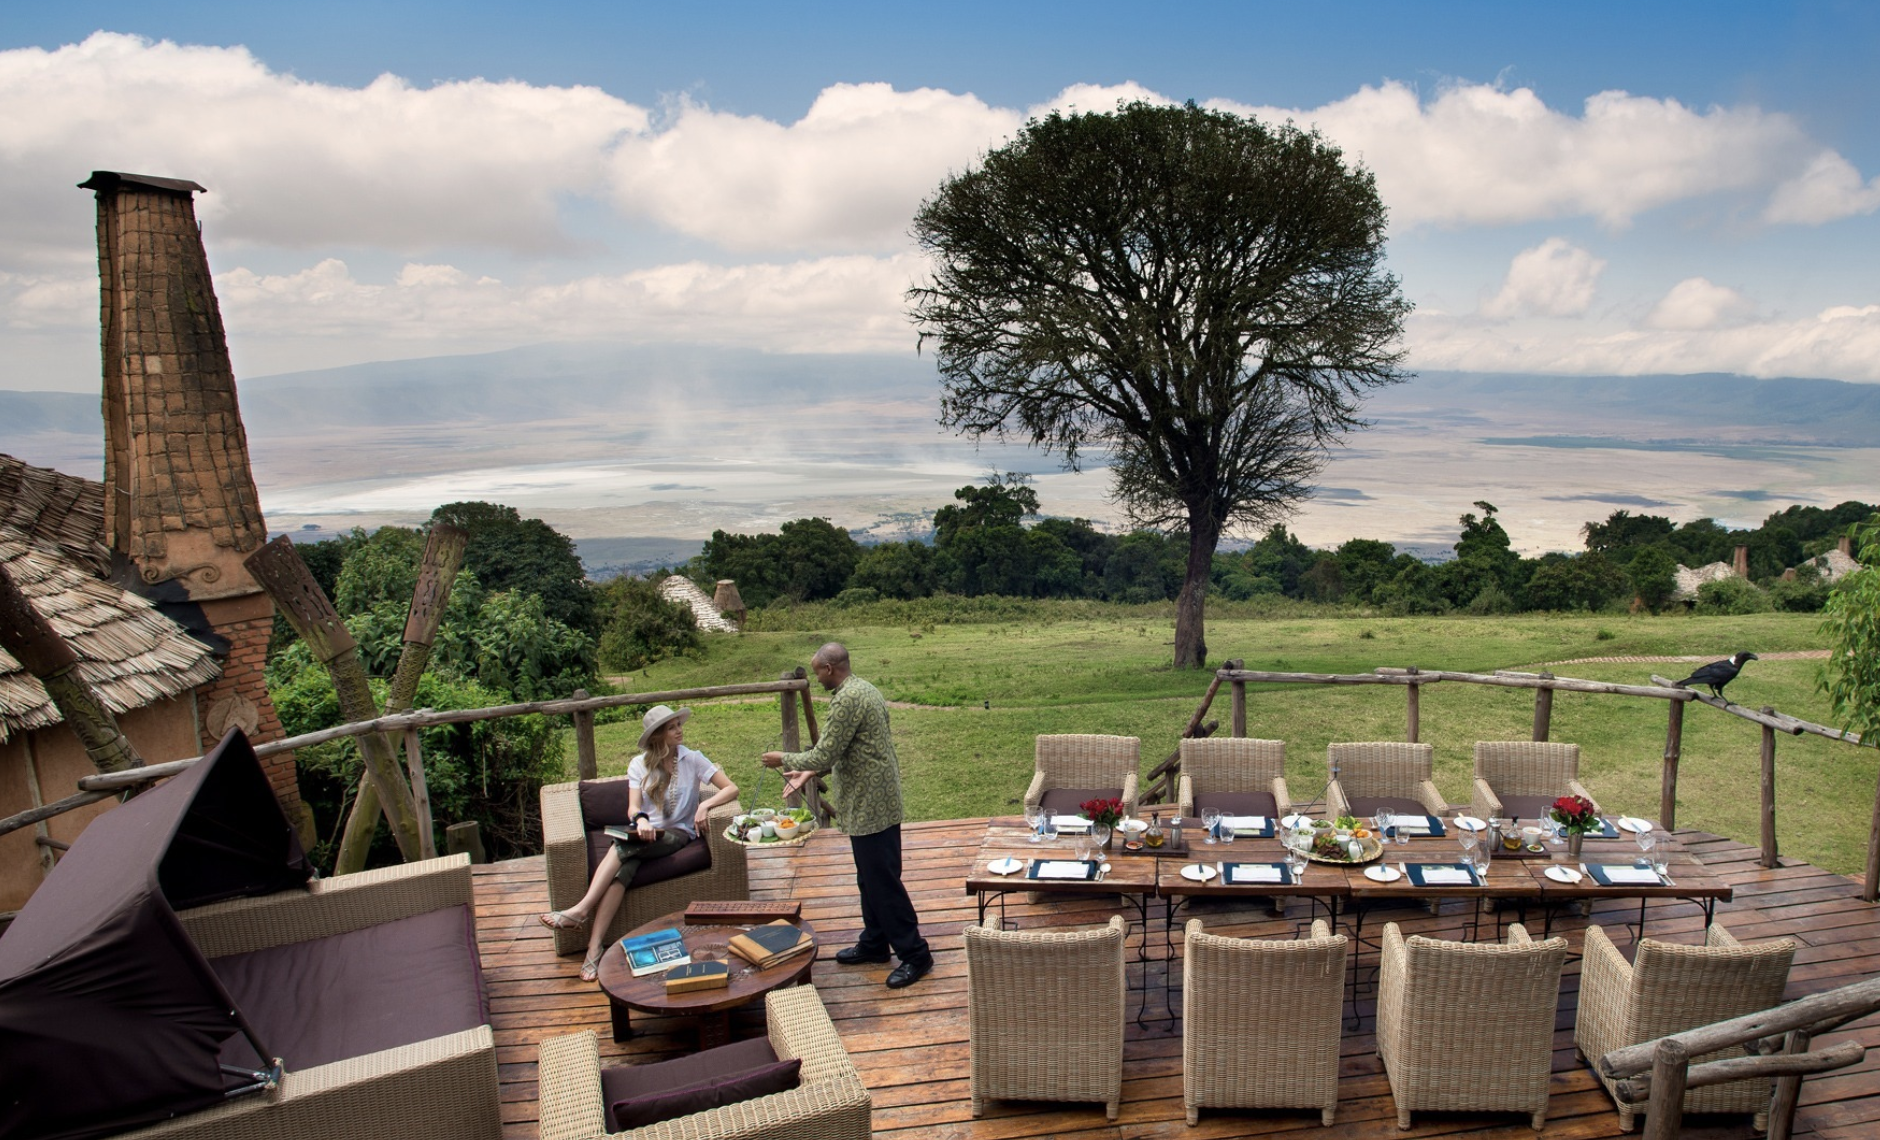 Outdoor dining at the andBeyond Ngorongoro Crater Lodge in Tanzania, Africa